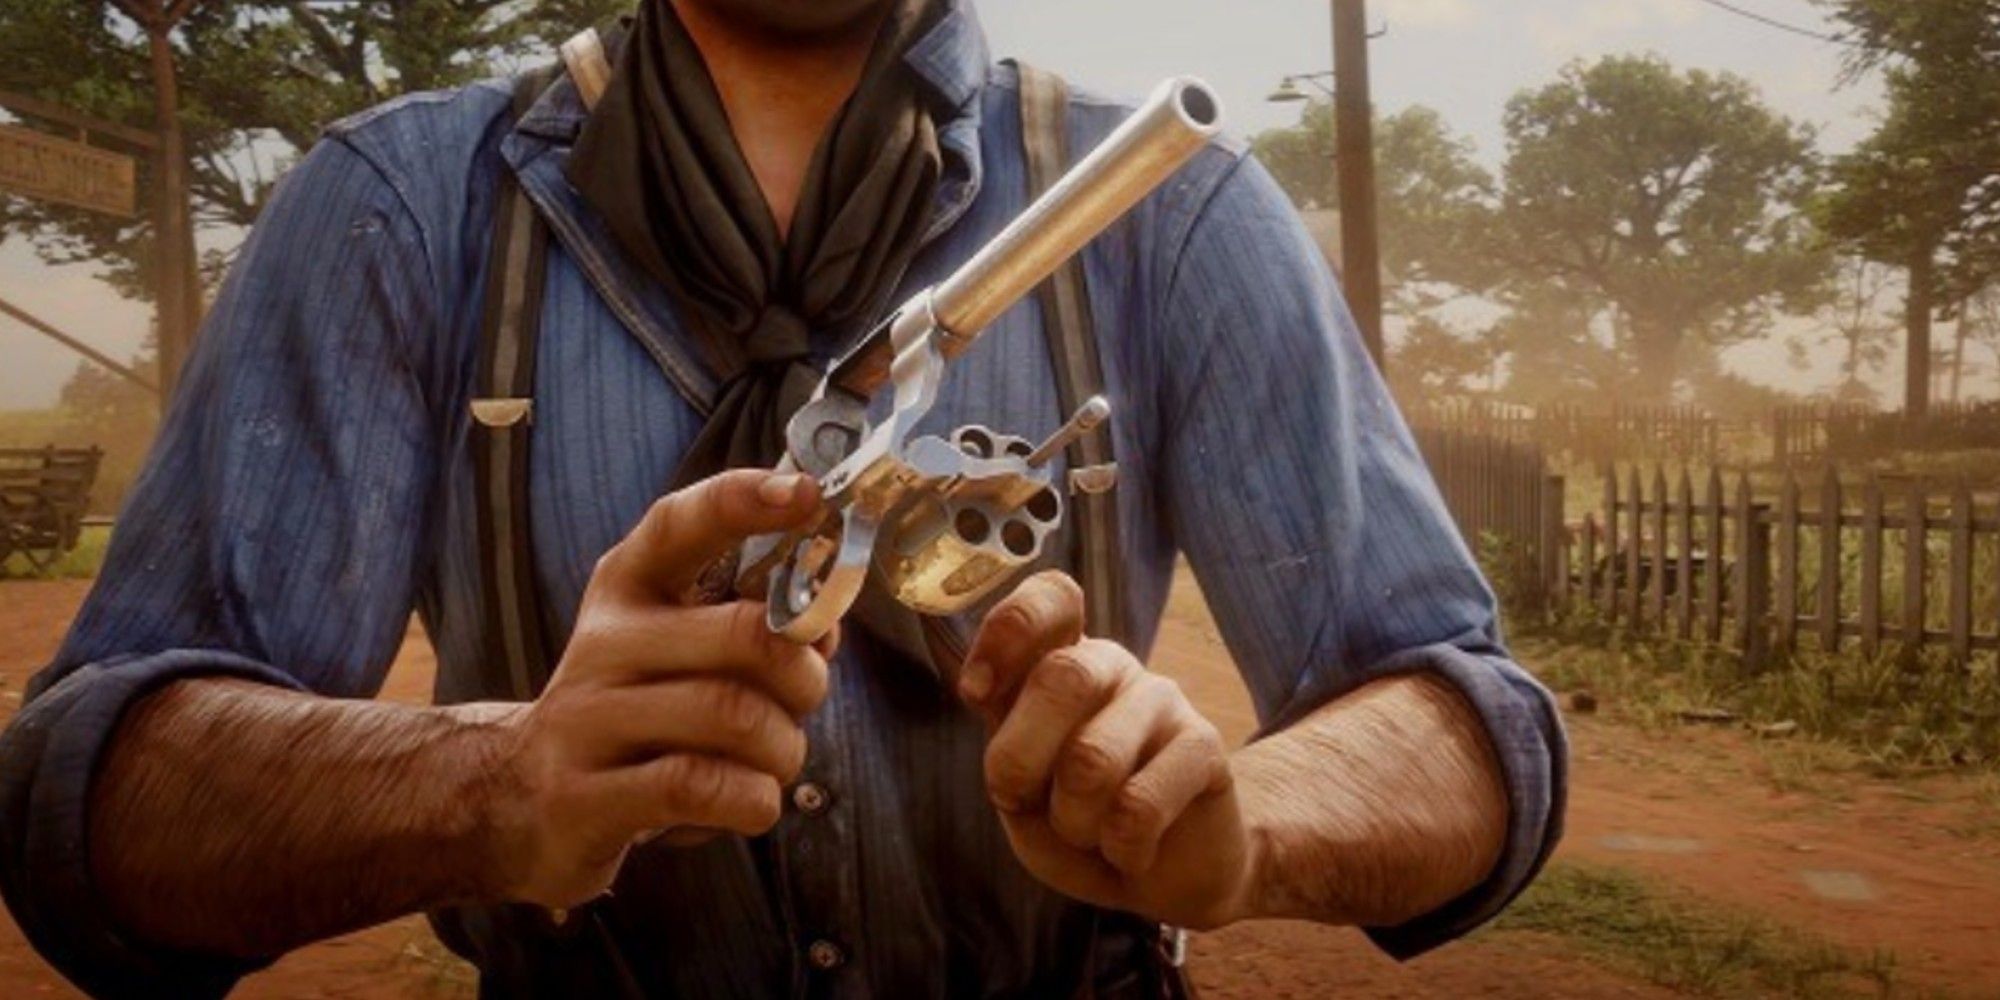 How RDR2 Prioritizes Realism At The Expense of Playability